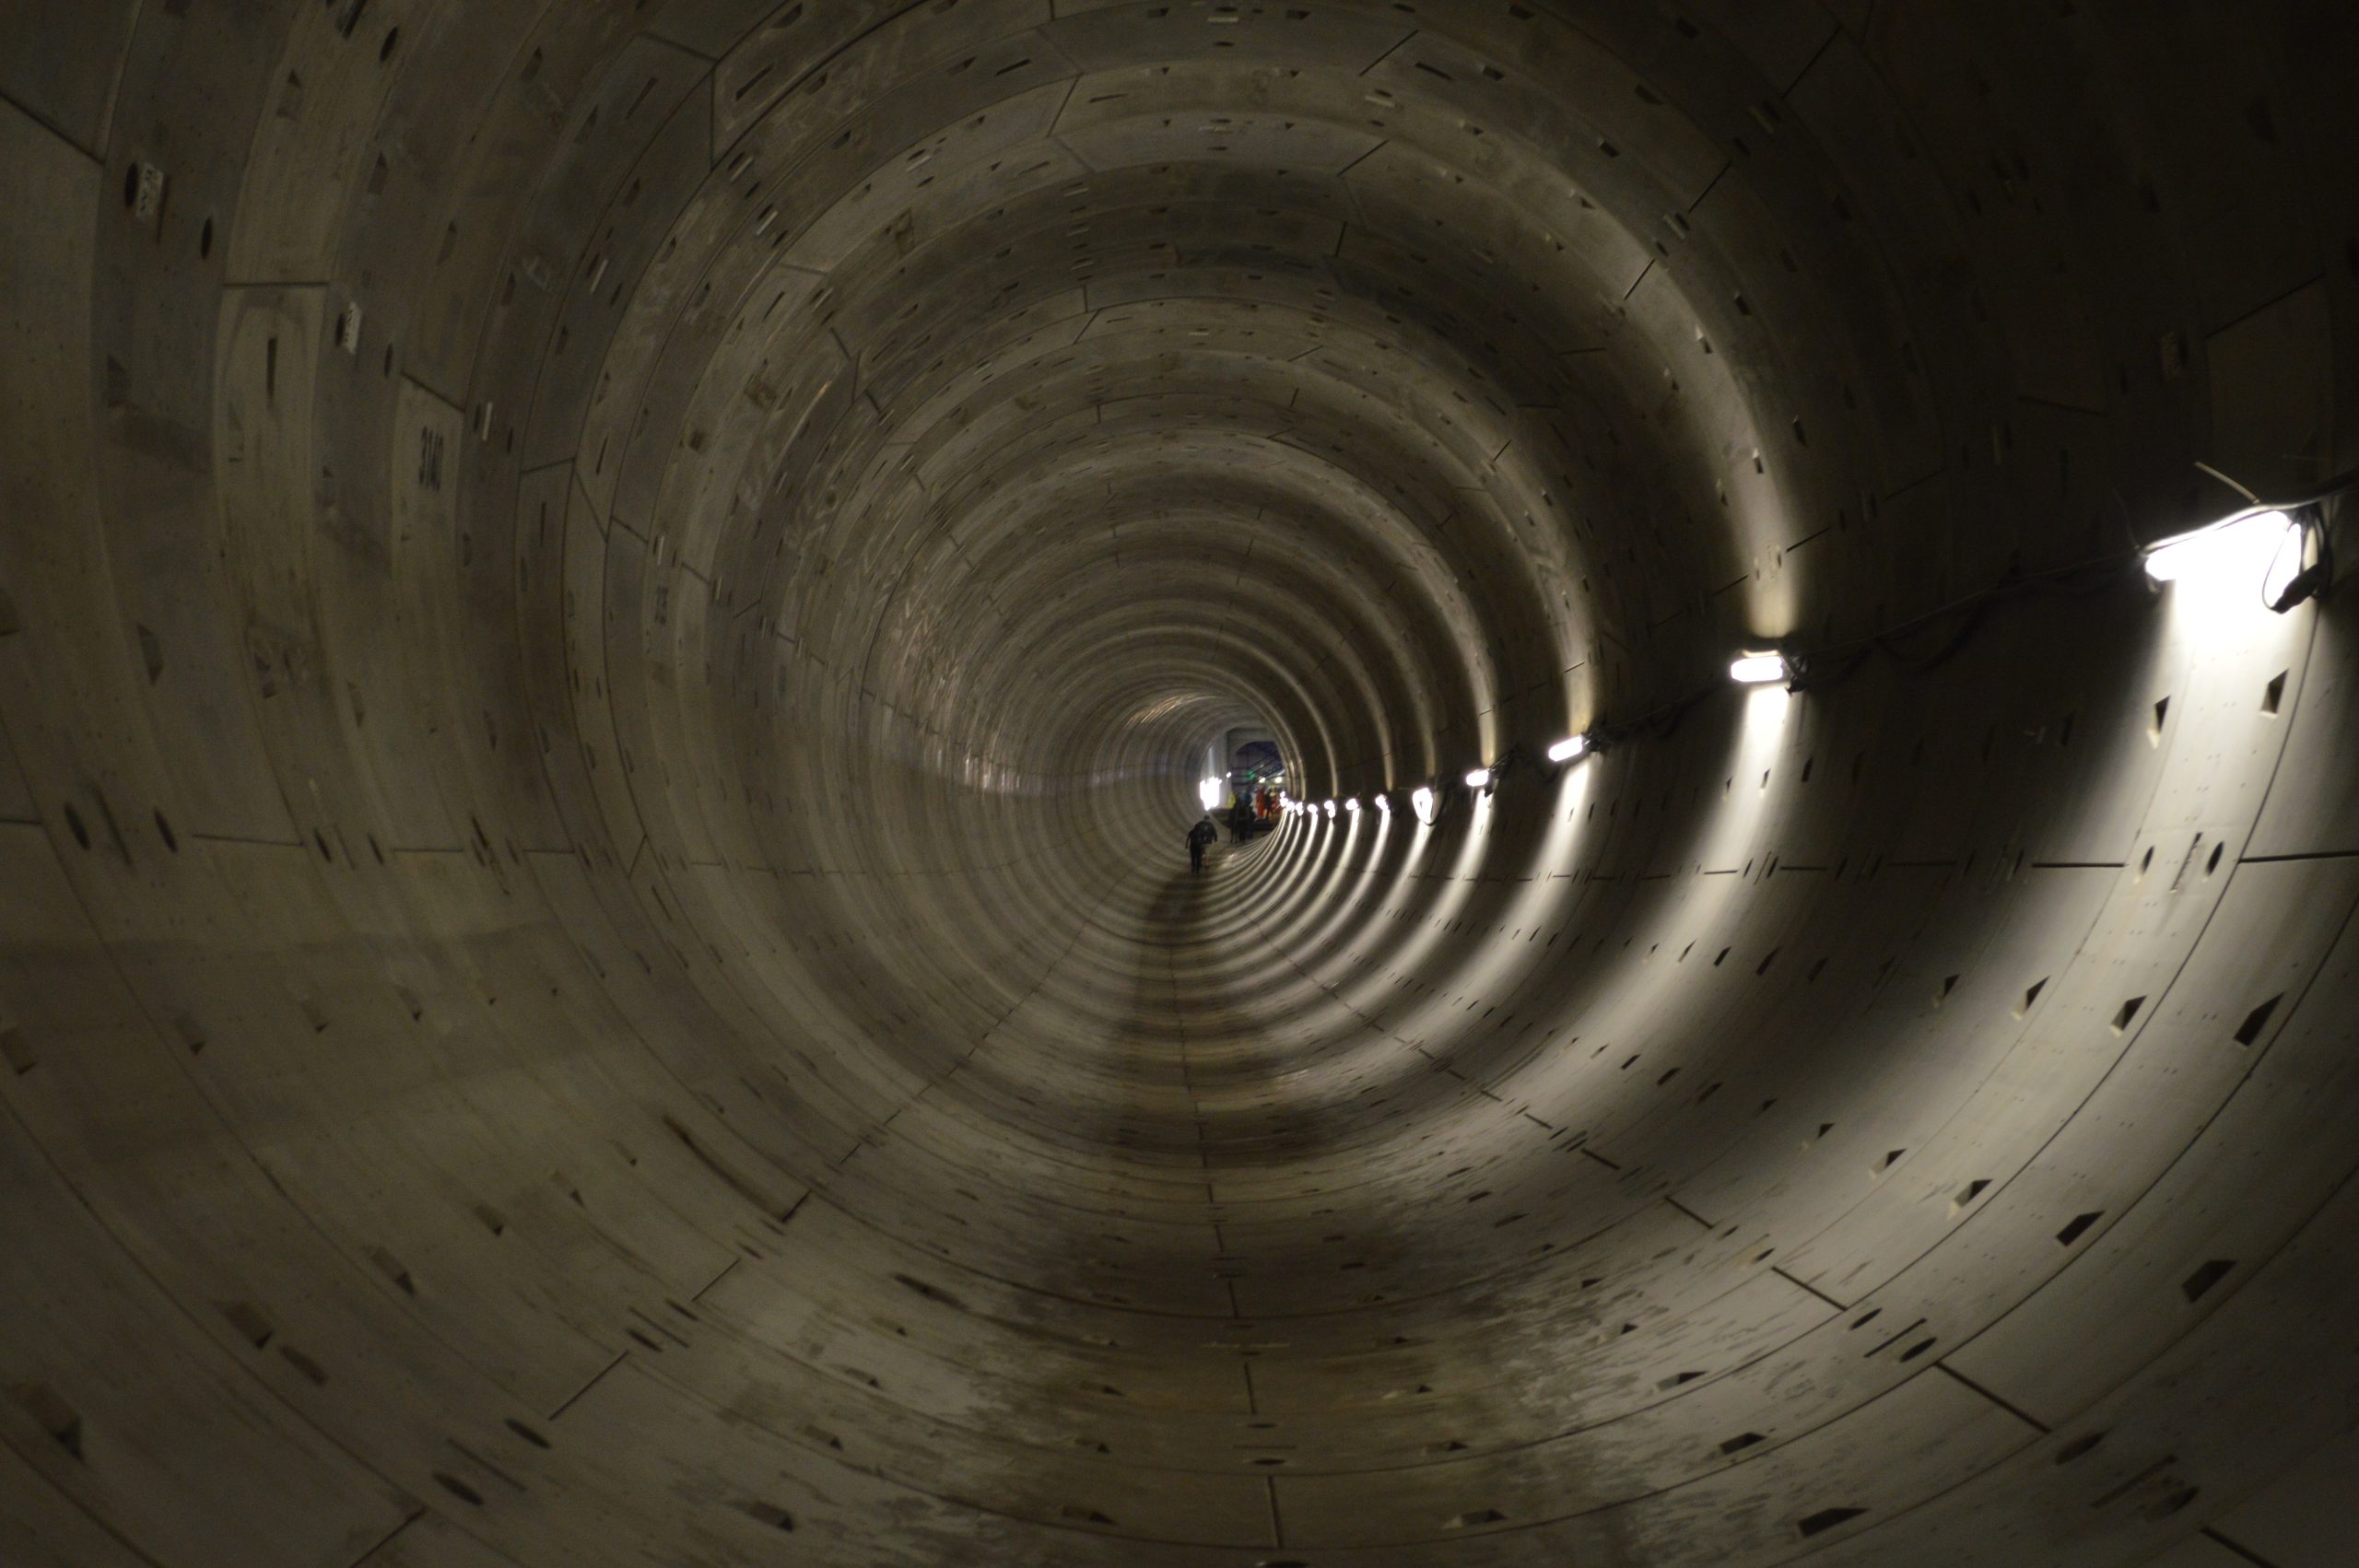 https://stormwater.wef.org/wp-content/uploads/2022/07/SWR-tunnel-aug22-scaled.jpg